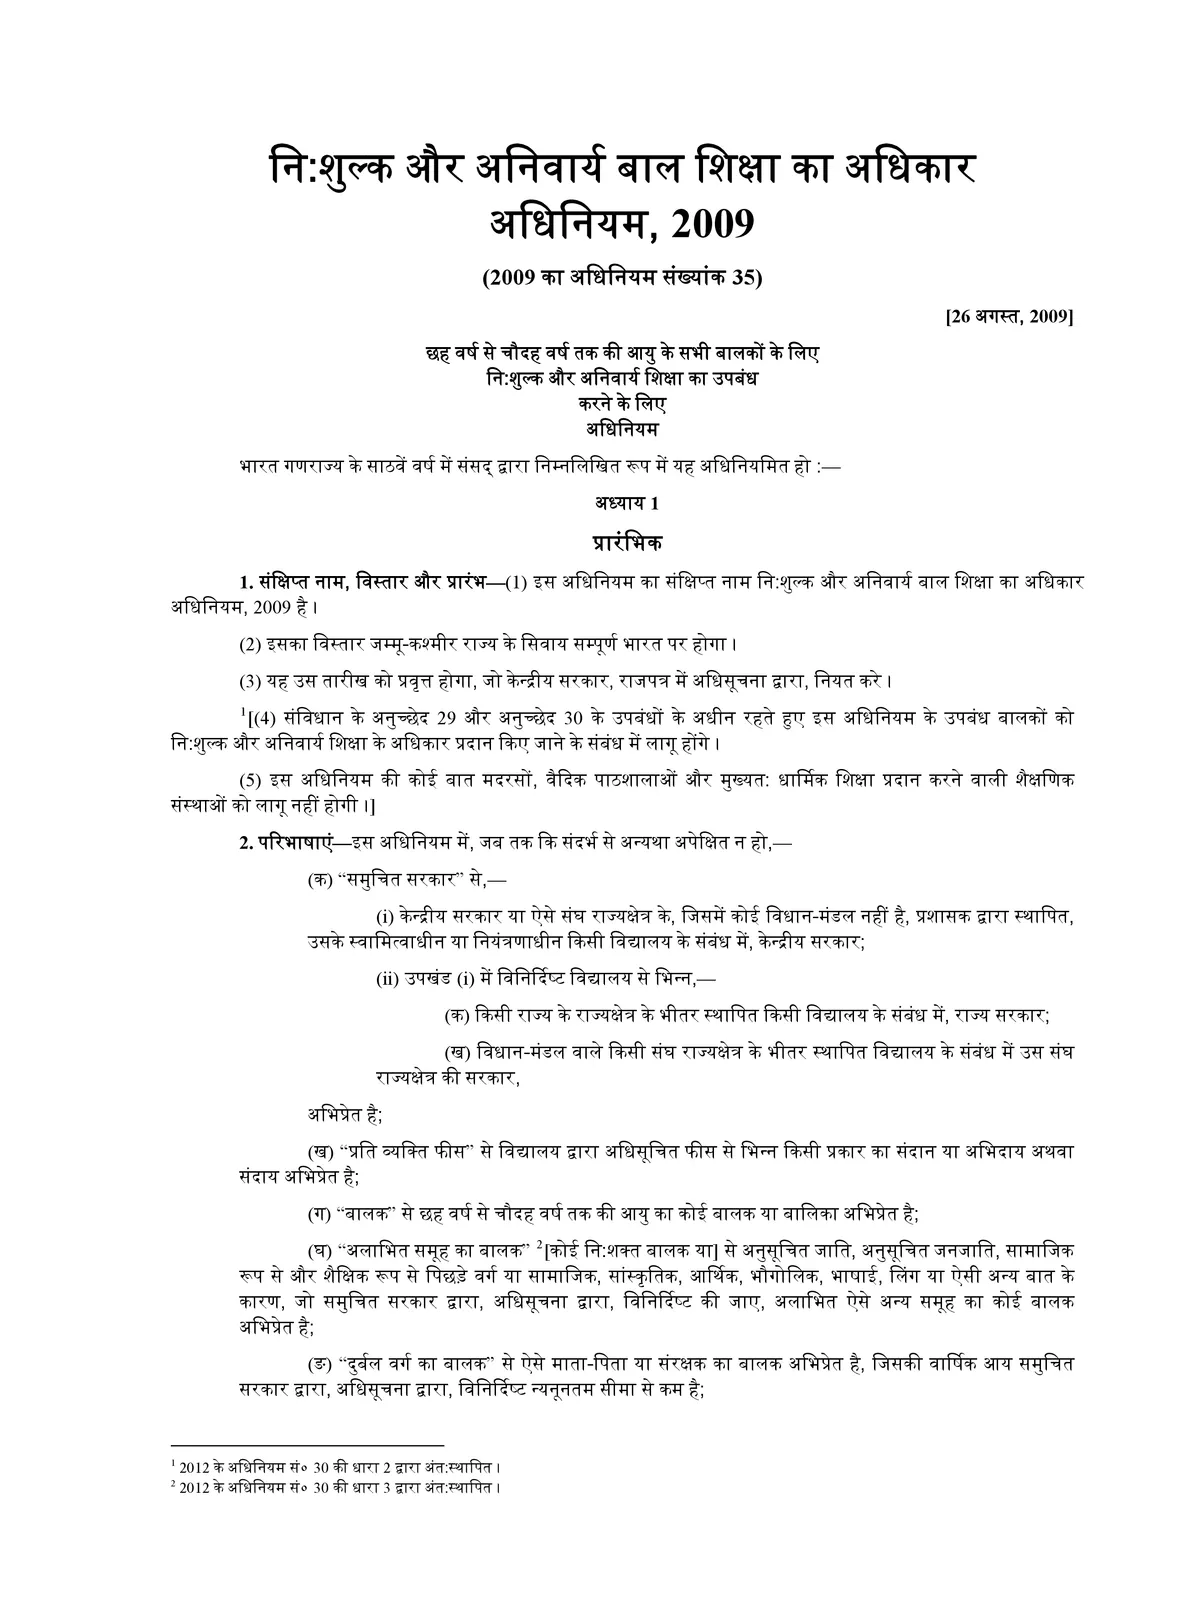 Right to Information Act 2009 (शिक्षा का अधिकार)